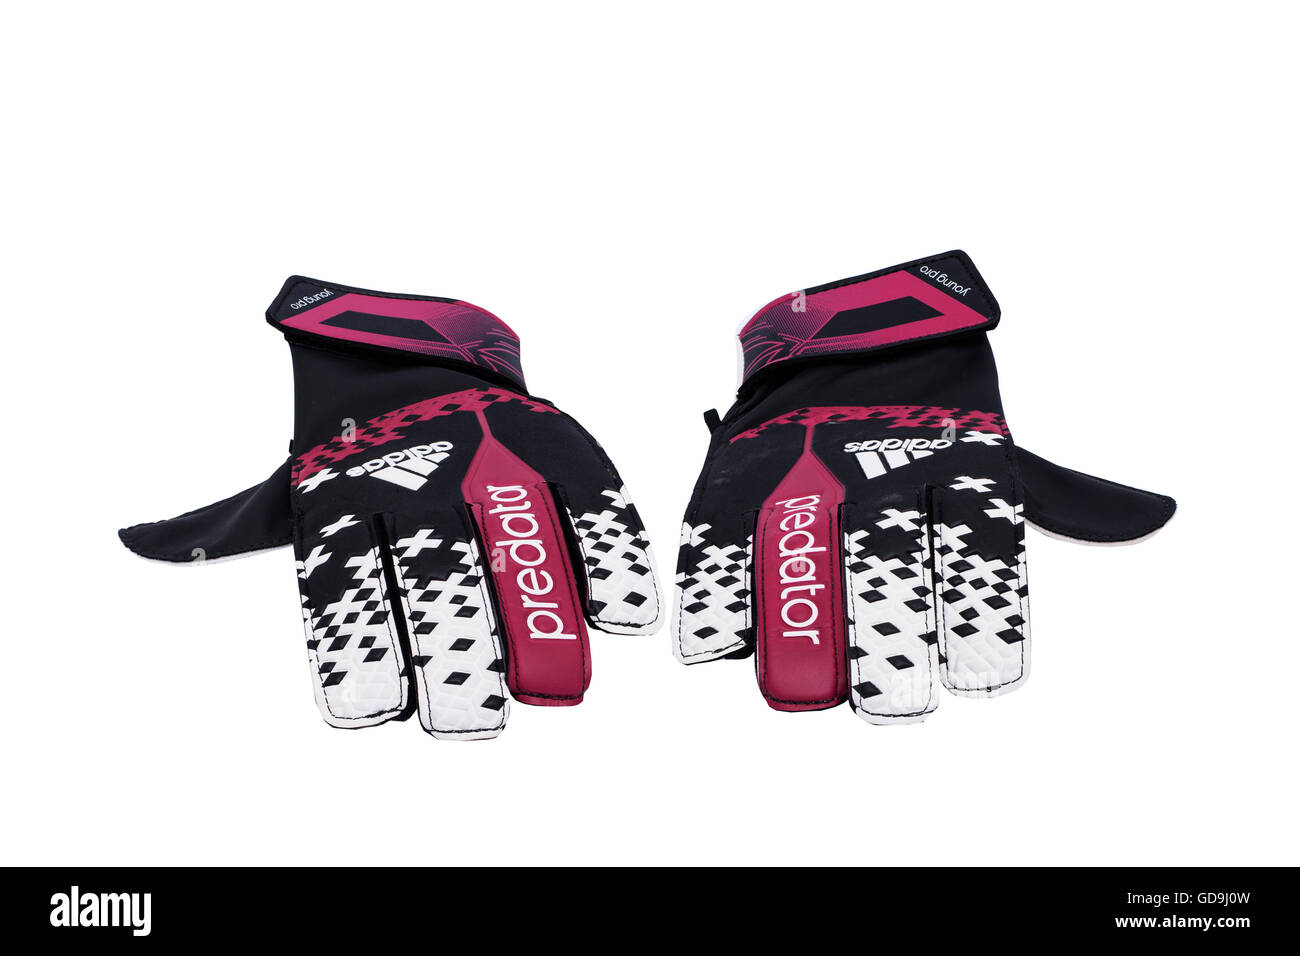 A pair of goalkeeper football gloves on a white background Stock Photo